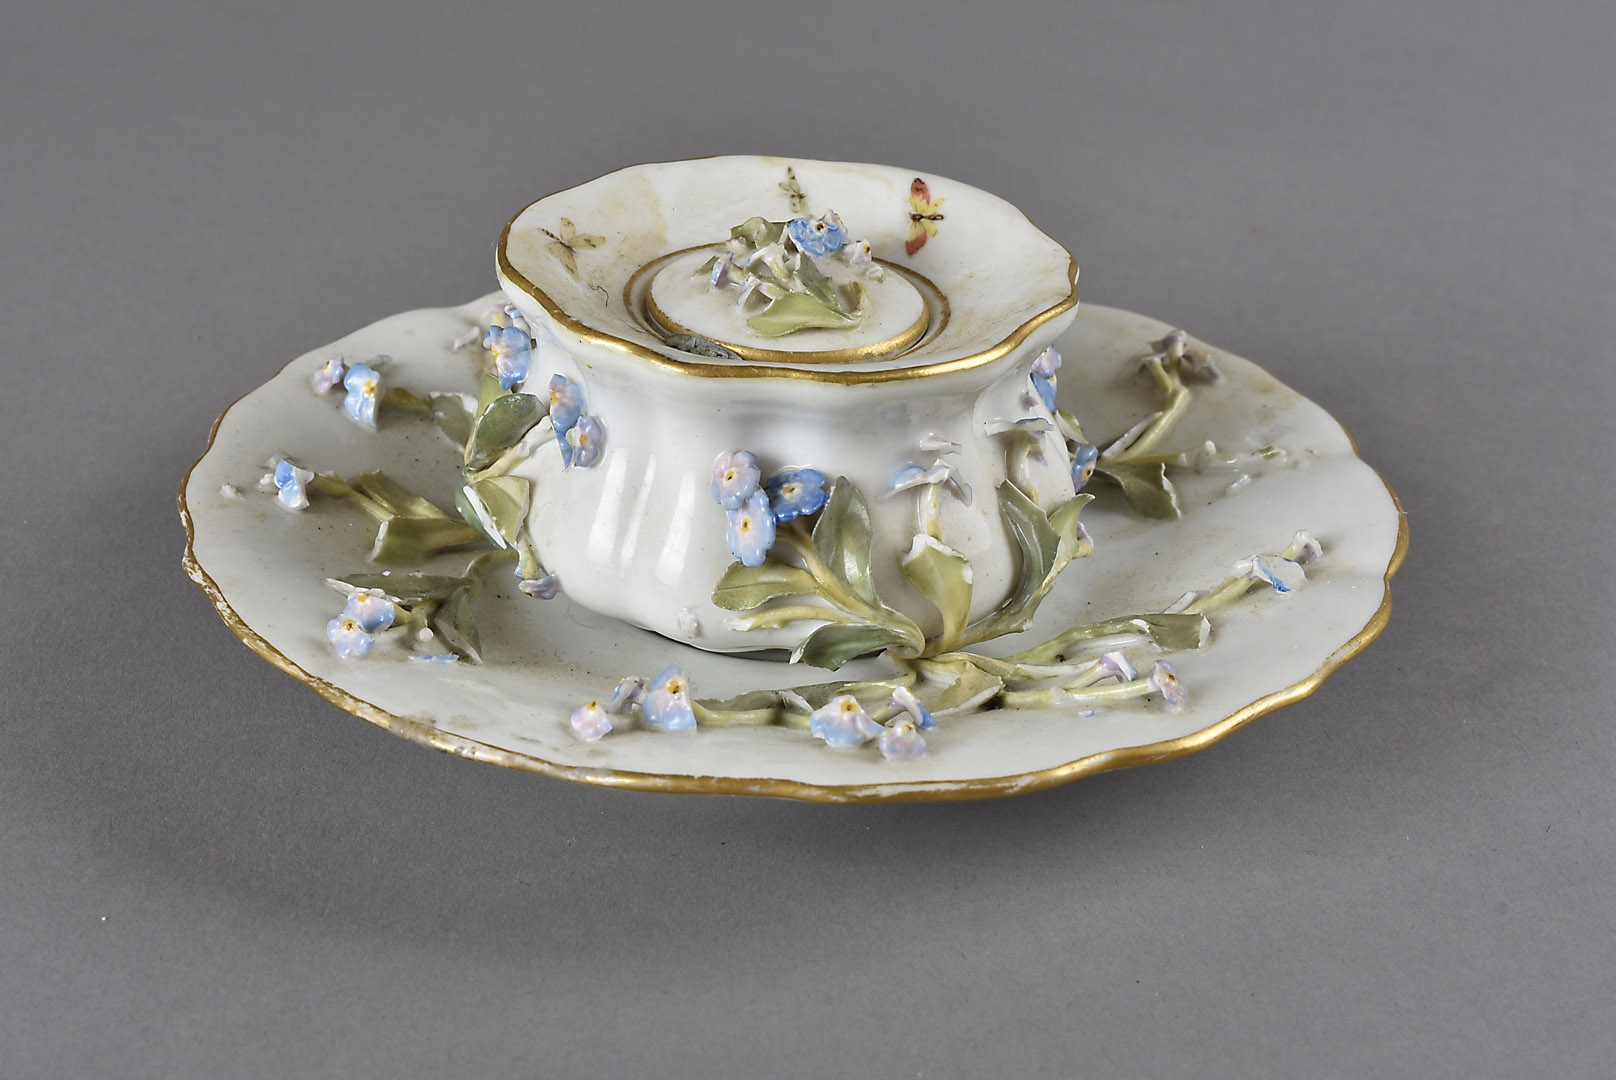 A Meissen floral encrusted inkwell, on stand, decorated with blue and white flowers AF, Meissen